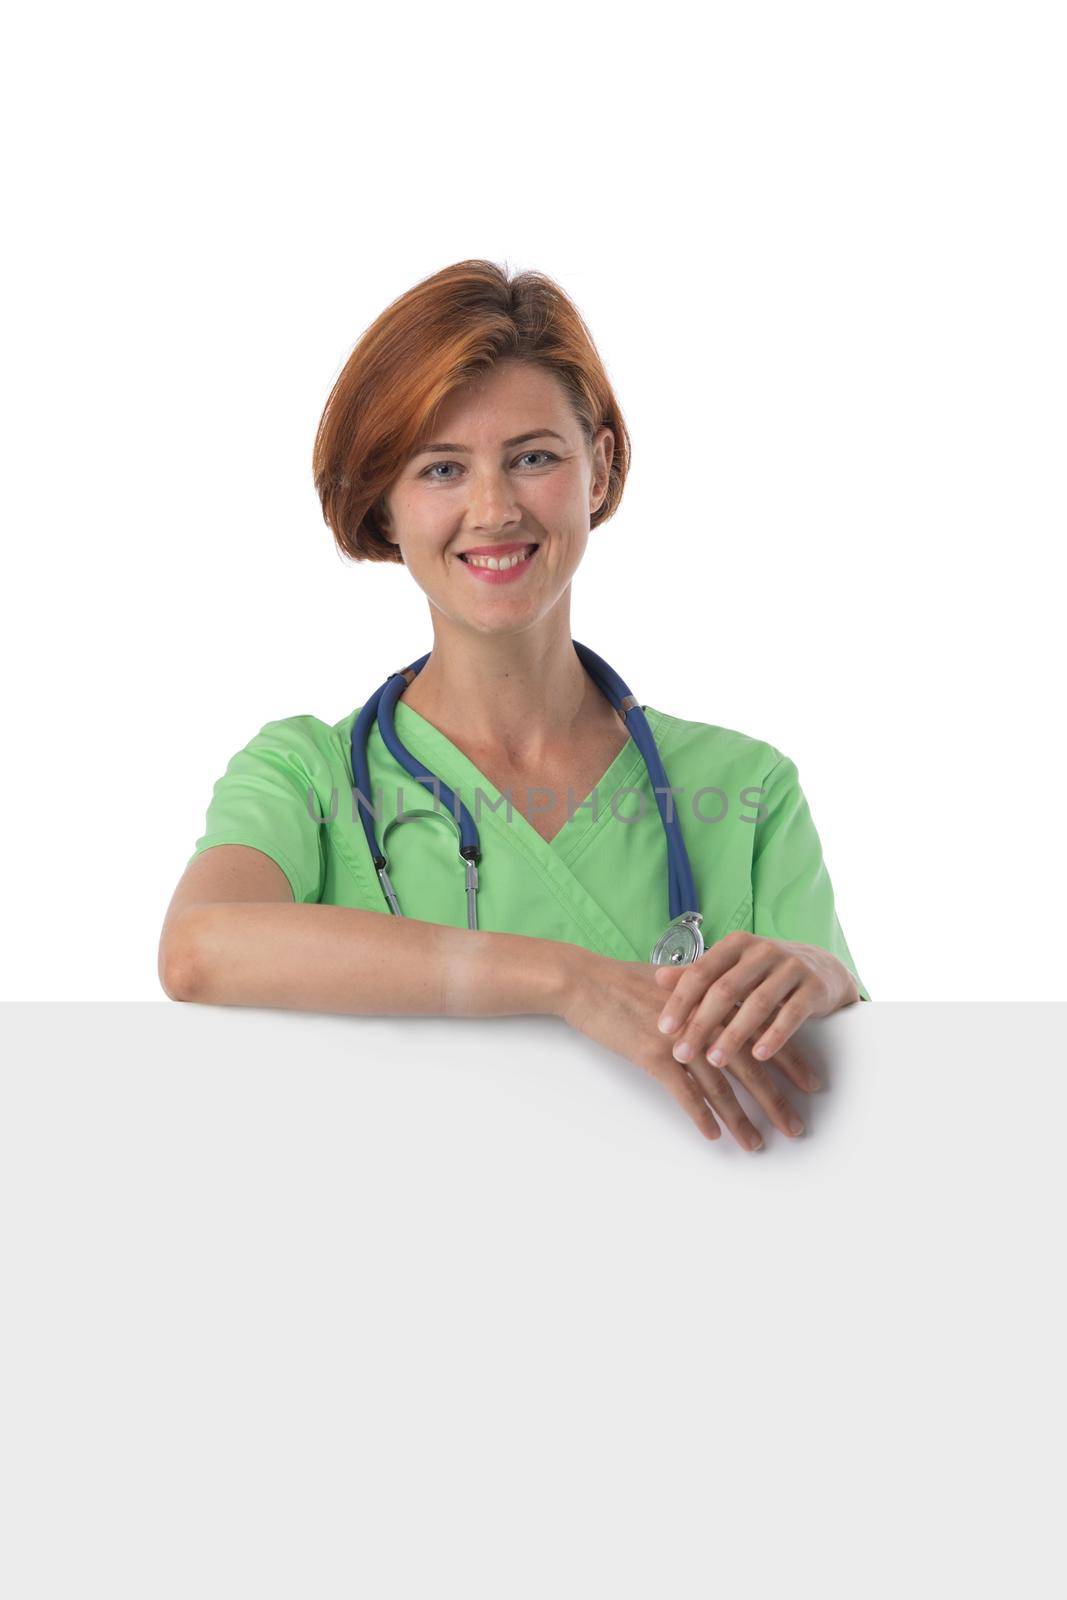 Medical doctor woman smile with stethoscope hold blank card board with copy space, concept of advertisement product, nurse wear green surgery suit Isolated over white background